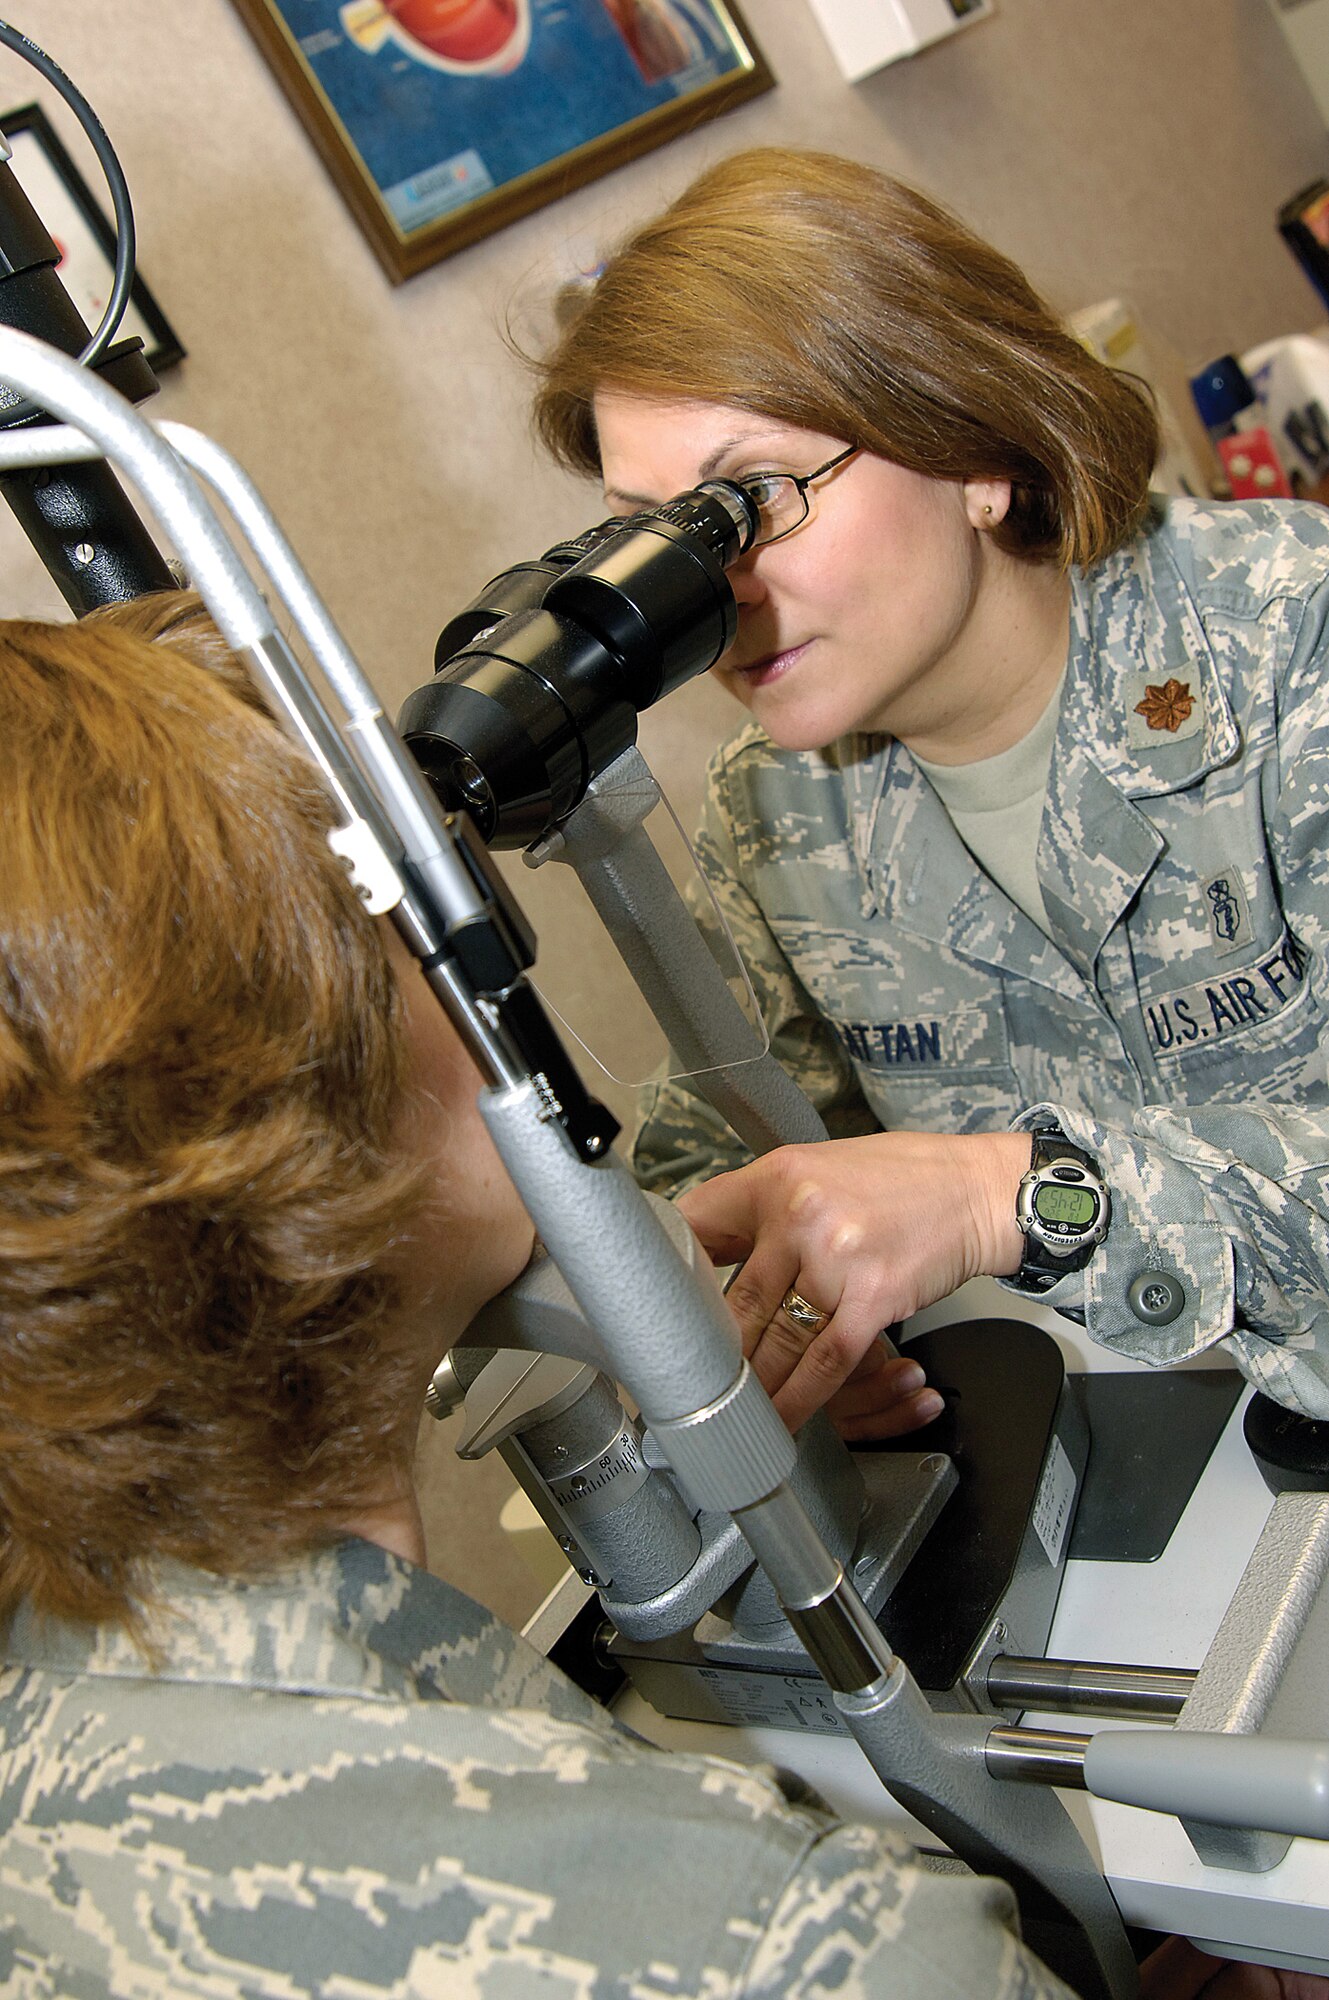 Approximately 600 patients a month come to the Optometry Clinic of the 72nd Aerospace Medicine Squadron. Maj. Judy Rattan uses a slit lamp to look at the structures of an eye. (Air Force photo by Margo Wright)